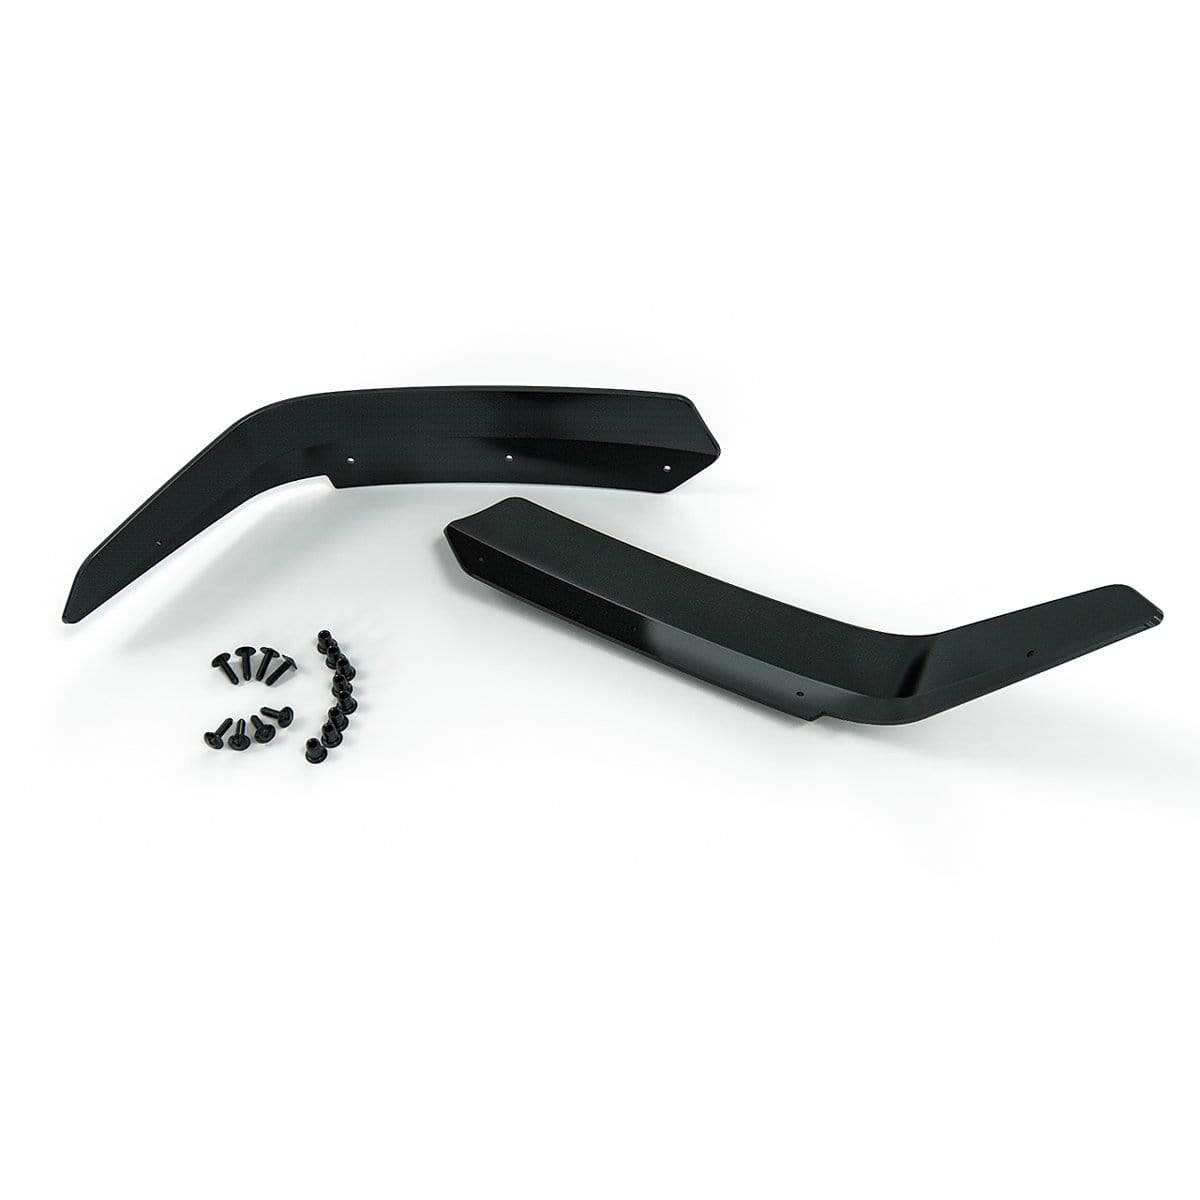 ACS Rear Spoiler Wicker Conversion Kit for Camaro [48-4-103]PRM[00-4-007] - Gloss Black Finish - Increased Downforce for Better Handling on Track Days - ACS Composite.